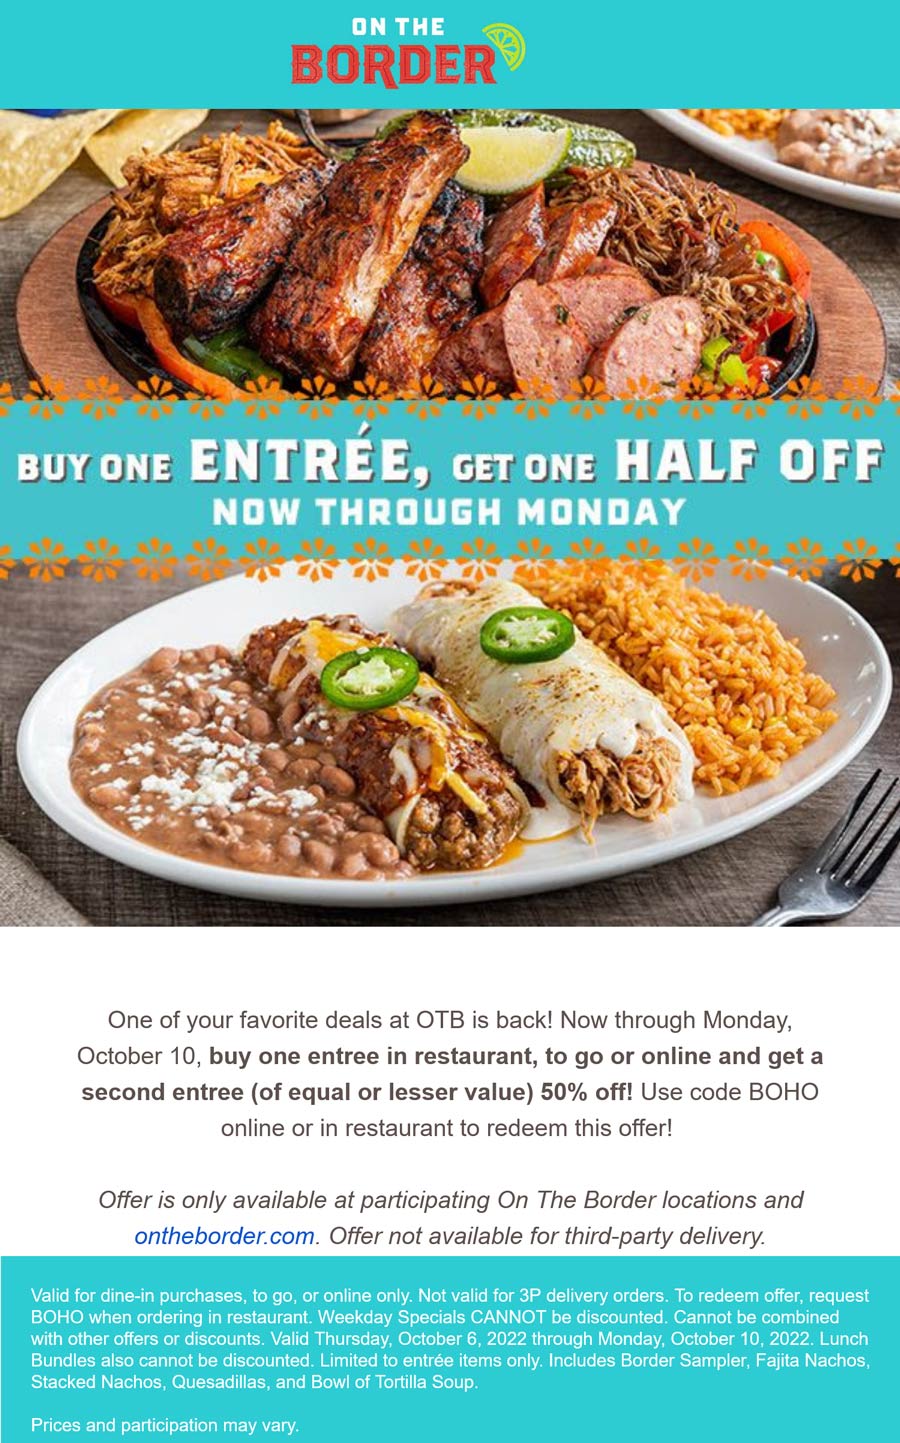 On The Border restaurants Coupon  Second entree 50% off at On The Border via promo code BOHO #ontheborder 